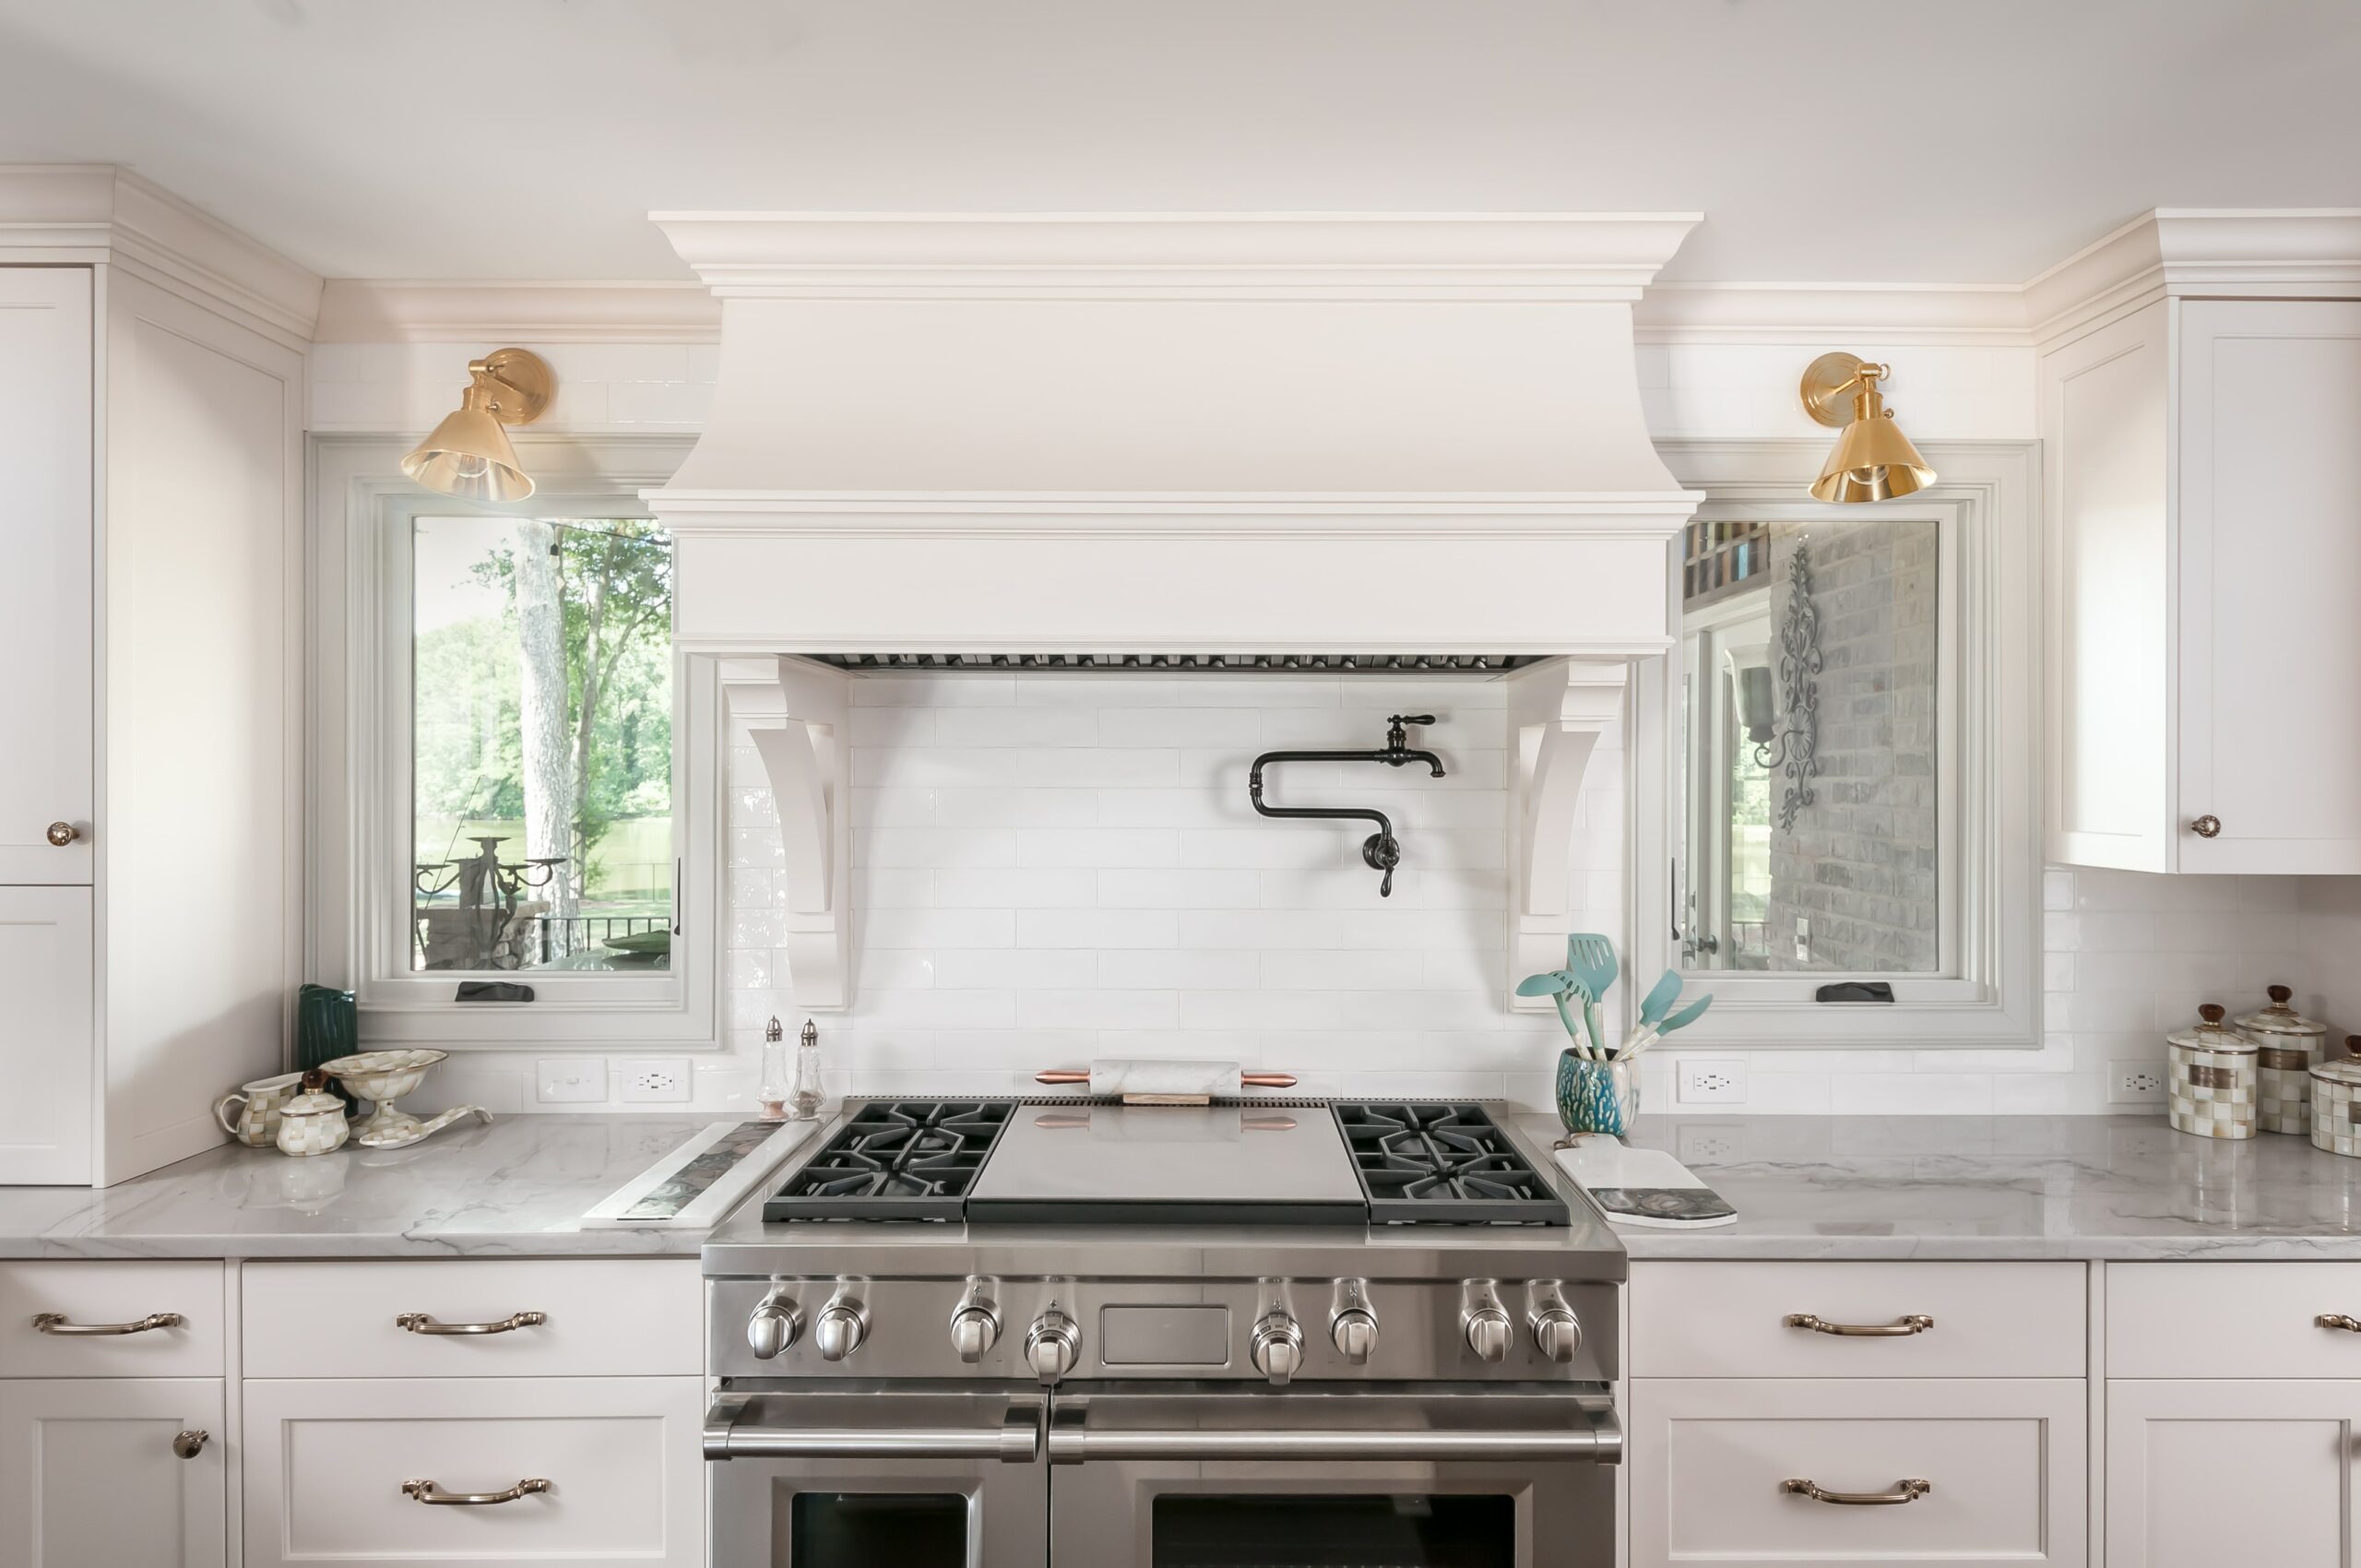 White kitchen with gold fixtures and stainless steel gas range stove